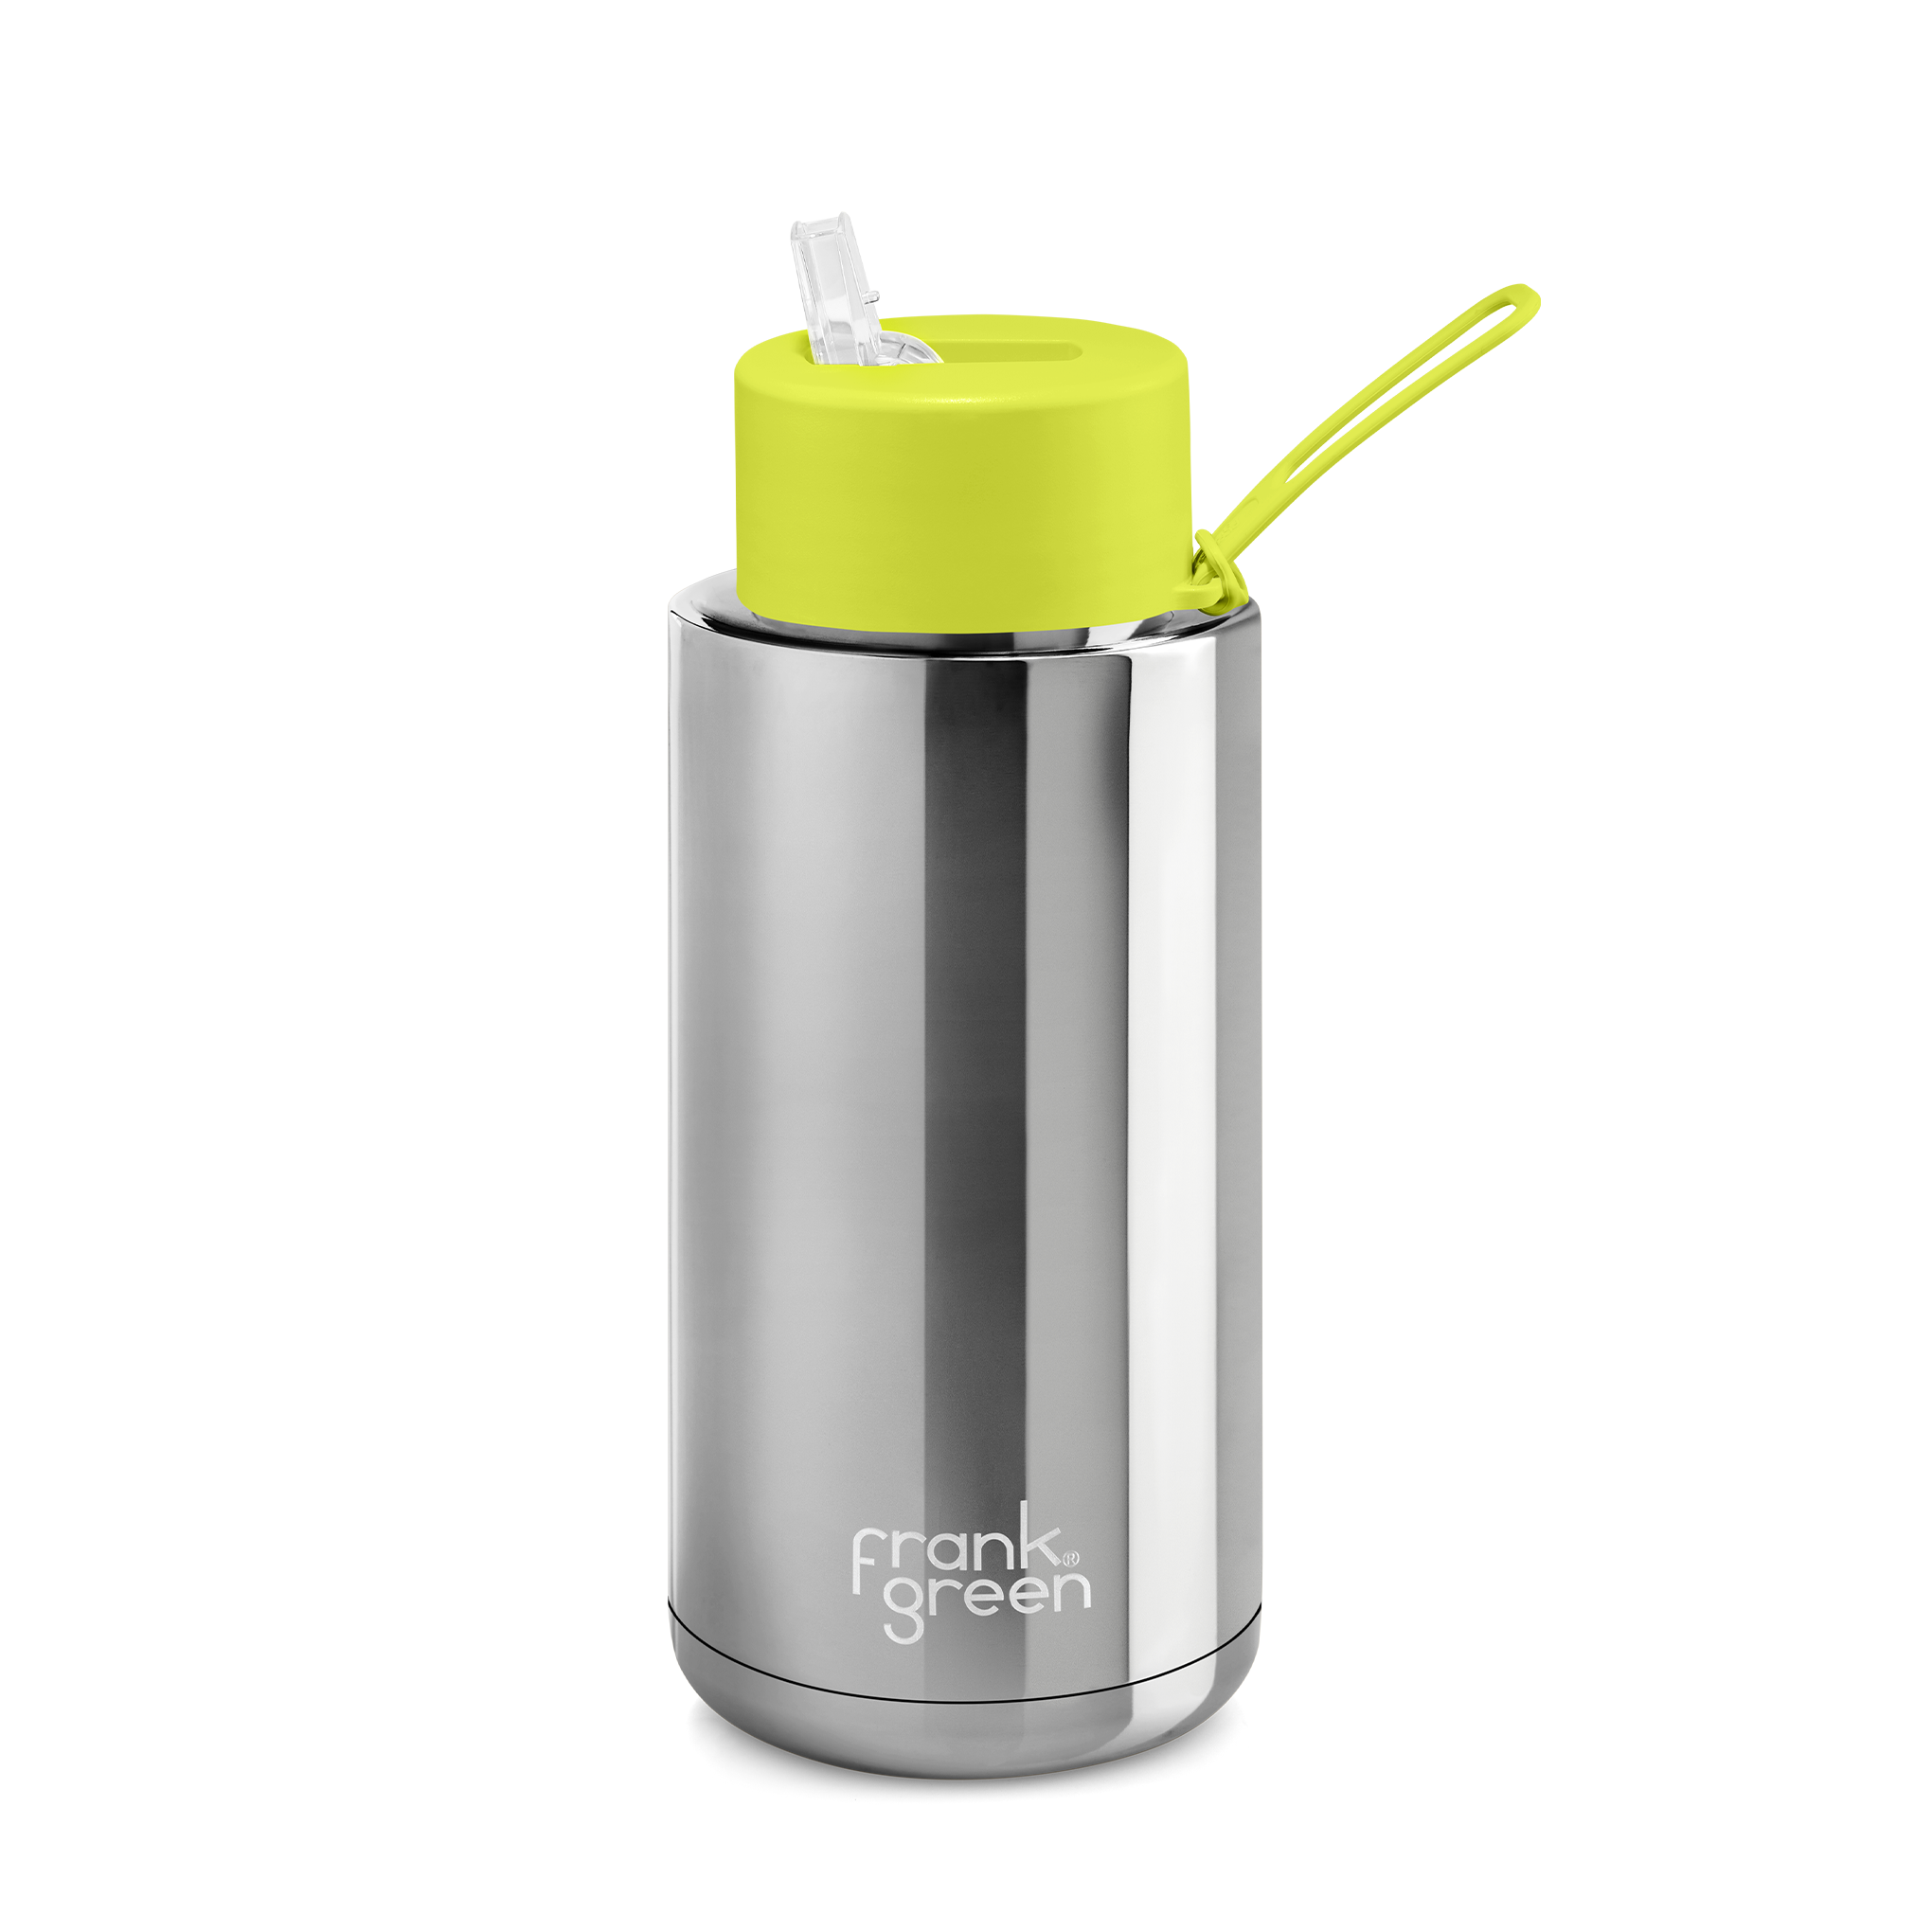  frank green Chrome Ceramic Reusable Water Bottle with Straw  Lid, 34oz Capacity (Chrome Rainbow - Cloud Lid) : Home & Kitchen